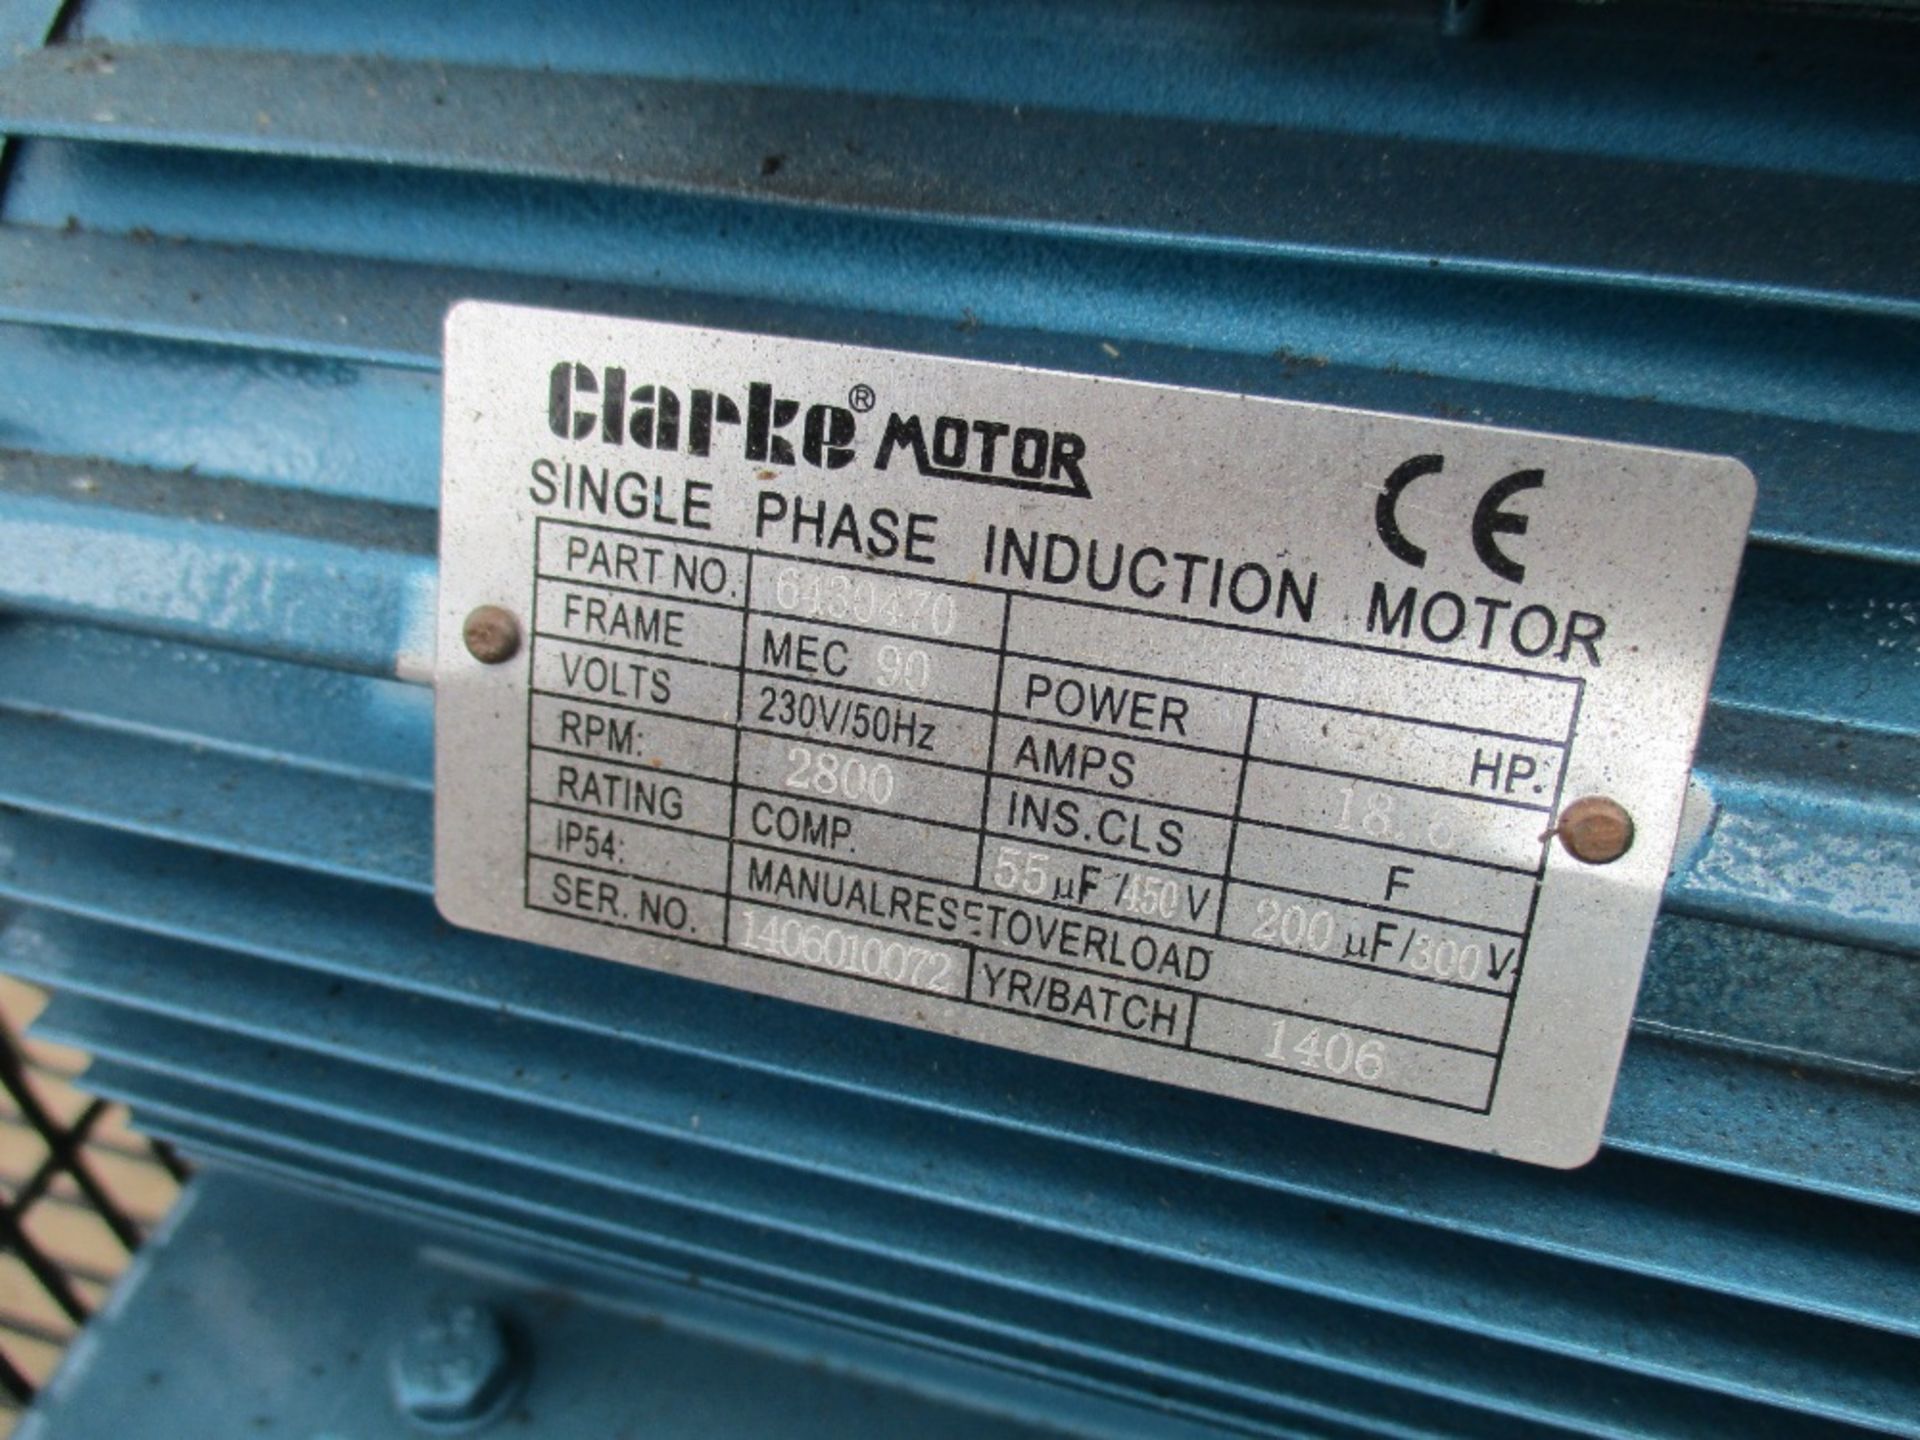 CLARKE TWIN MOTORED AIR COMPRESSOR SINGLE PHASE YEAR 2014 BUILD SOURCED FROM COMPANY CLOSURE - Image 5 of 6